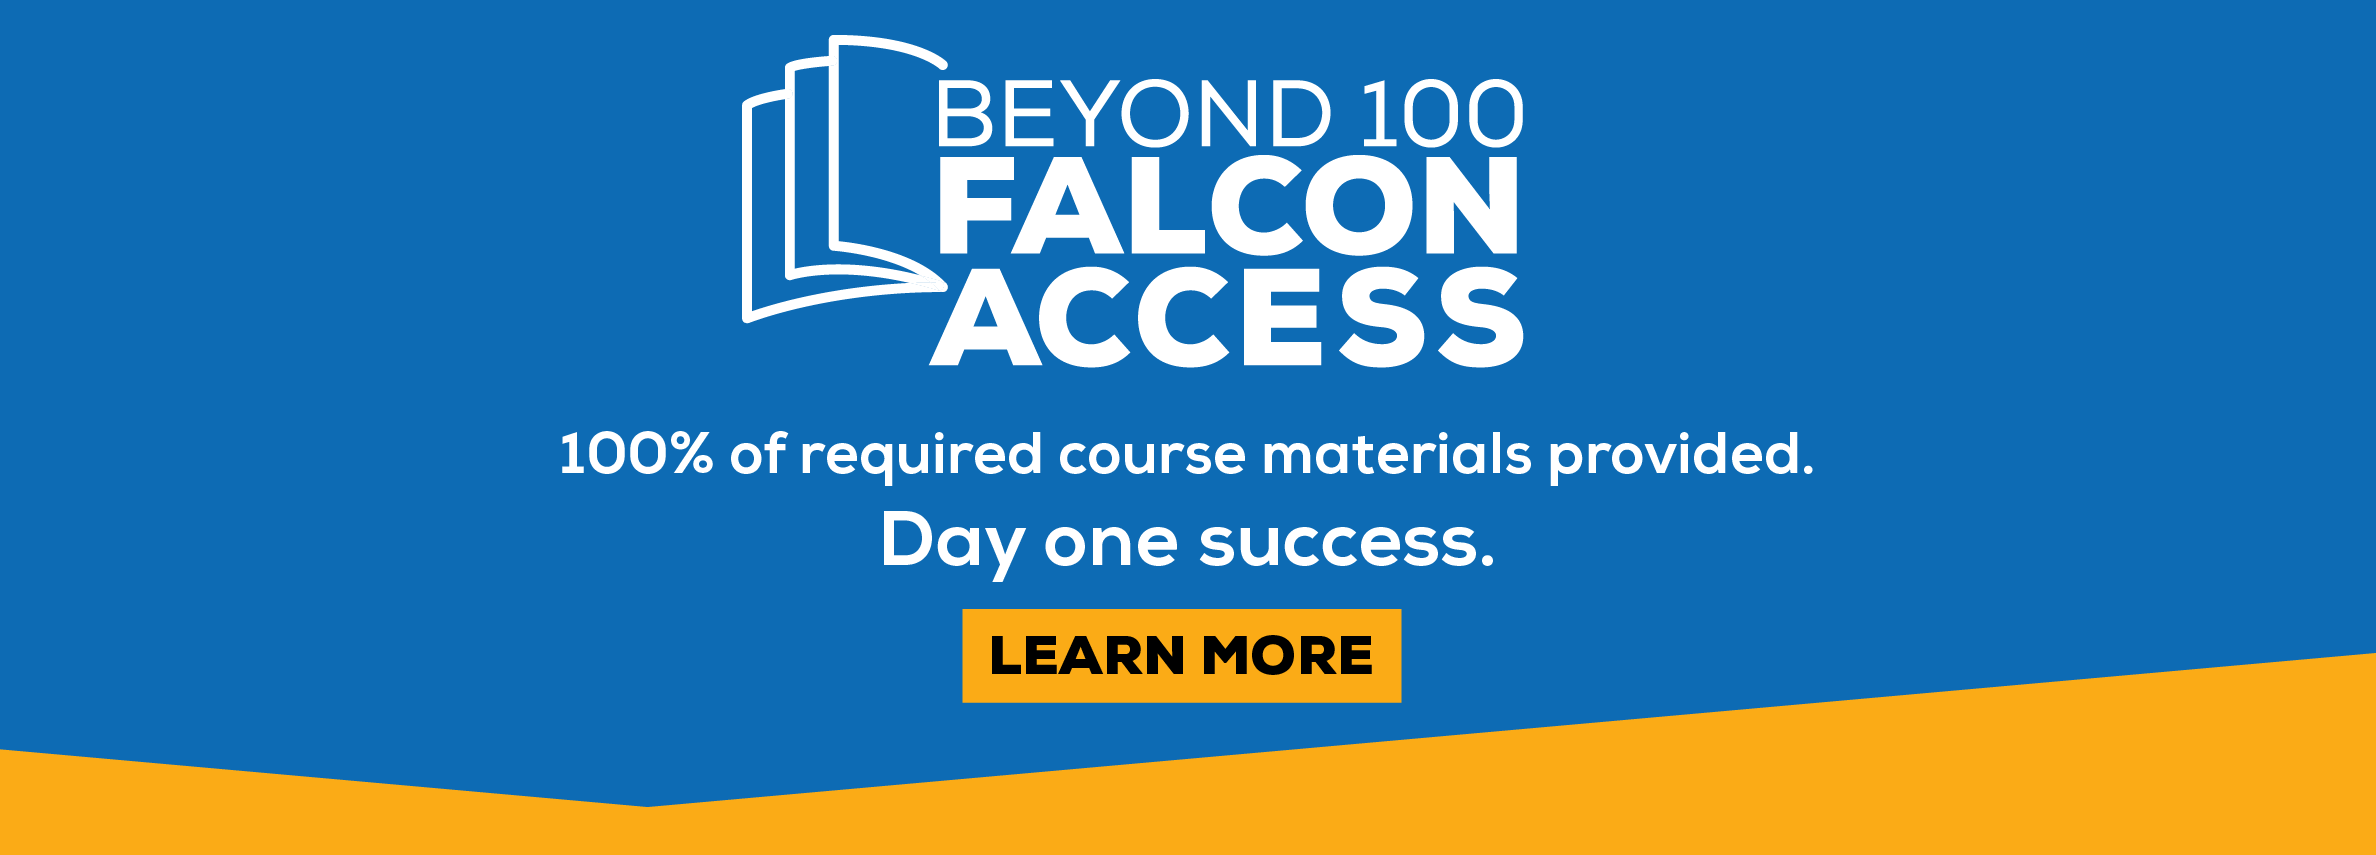 BEYOND 100 FALCON ACCESS 100% of required course materials provided. Day one success. LEARN MORE